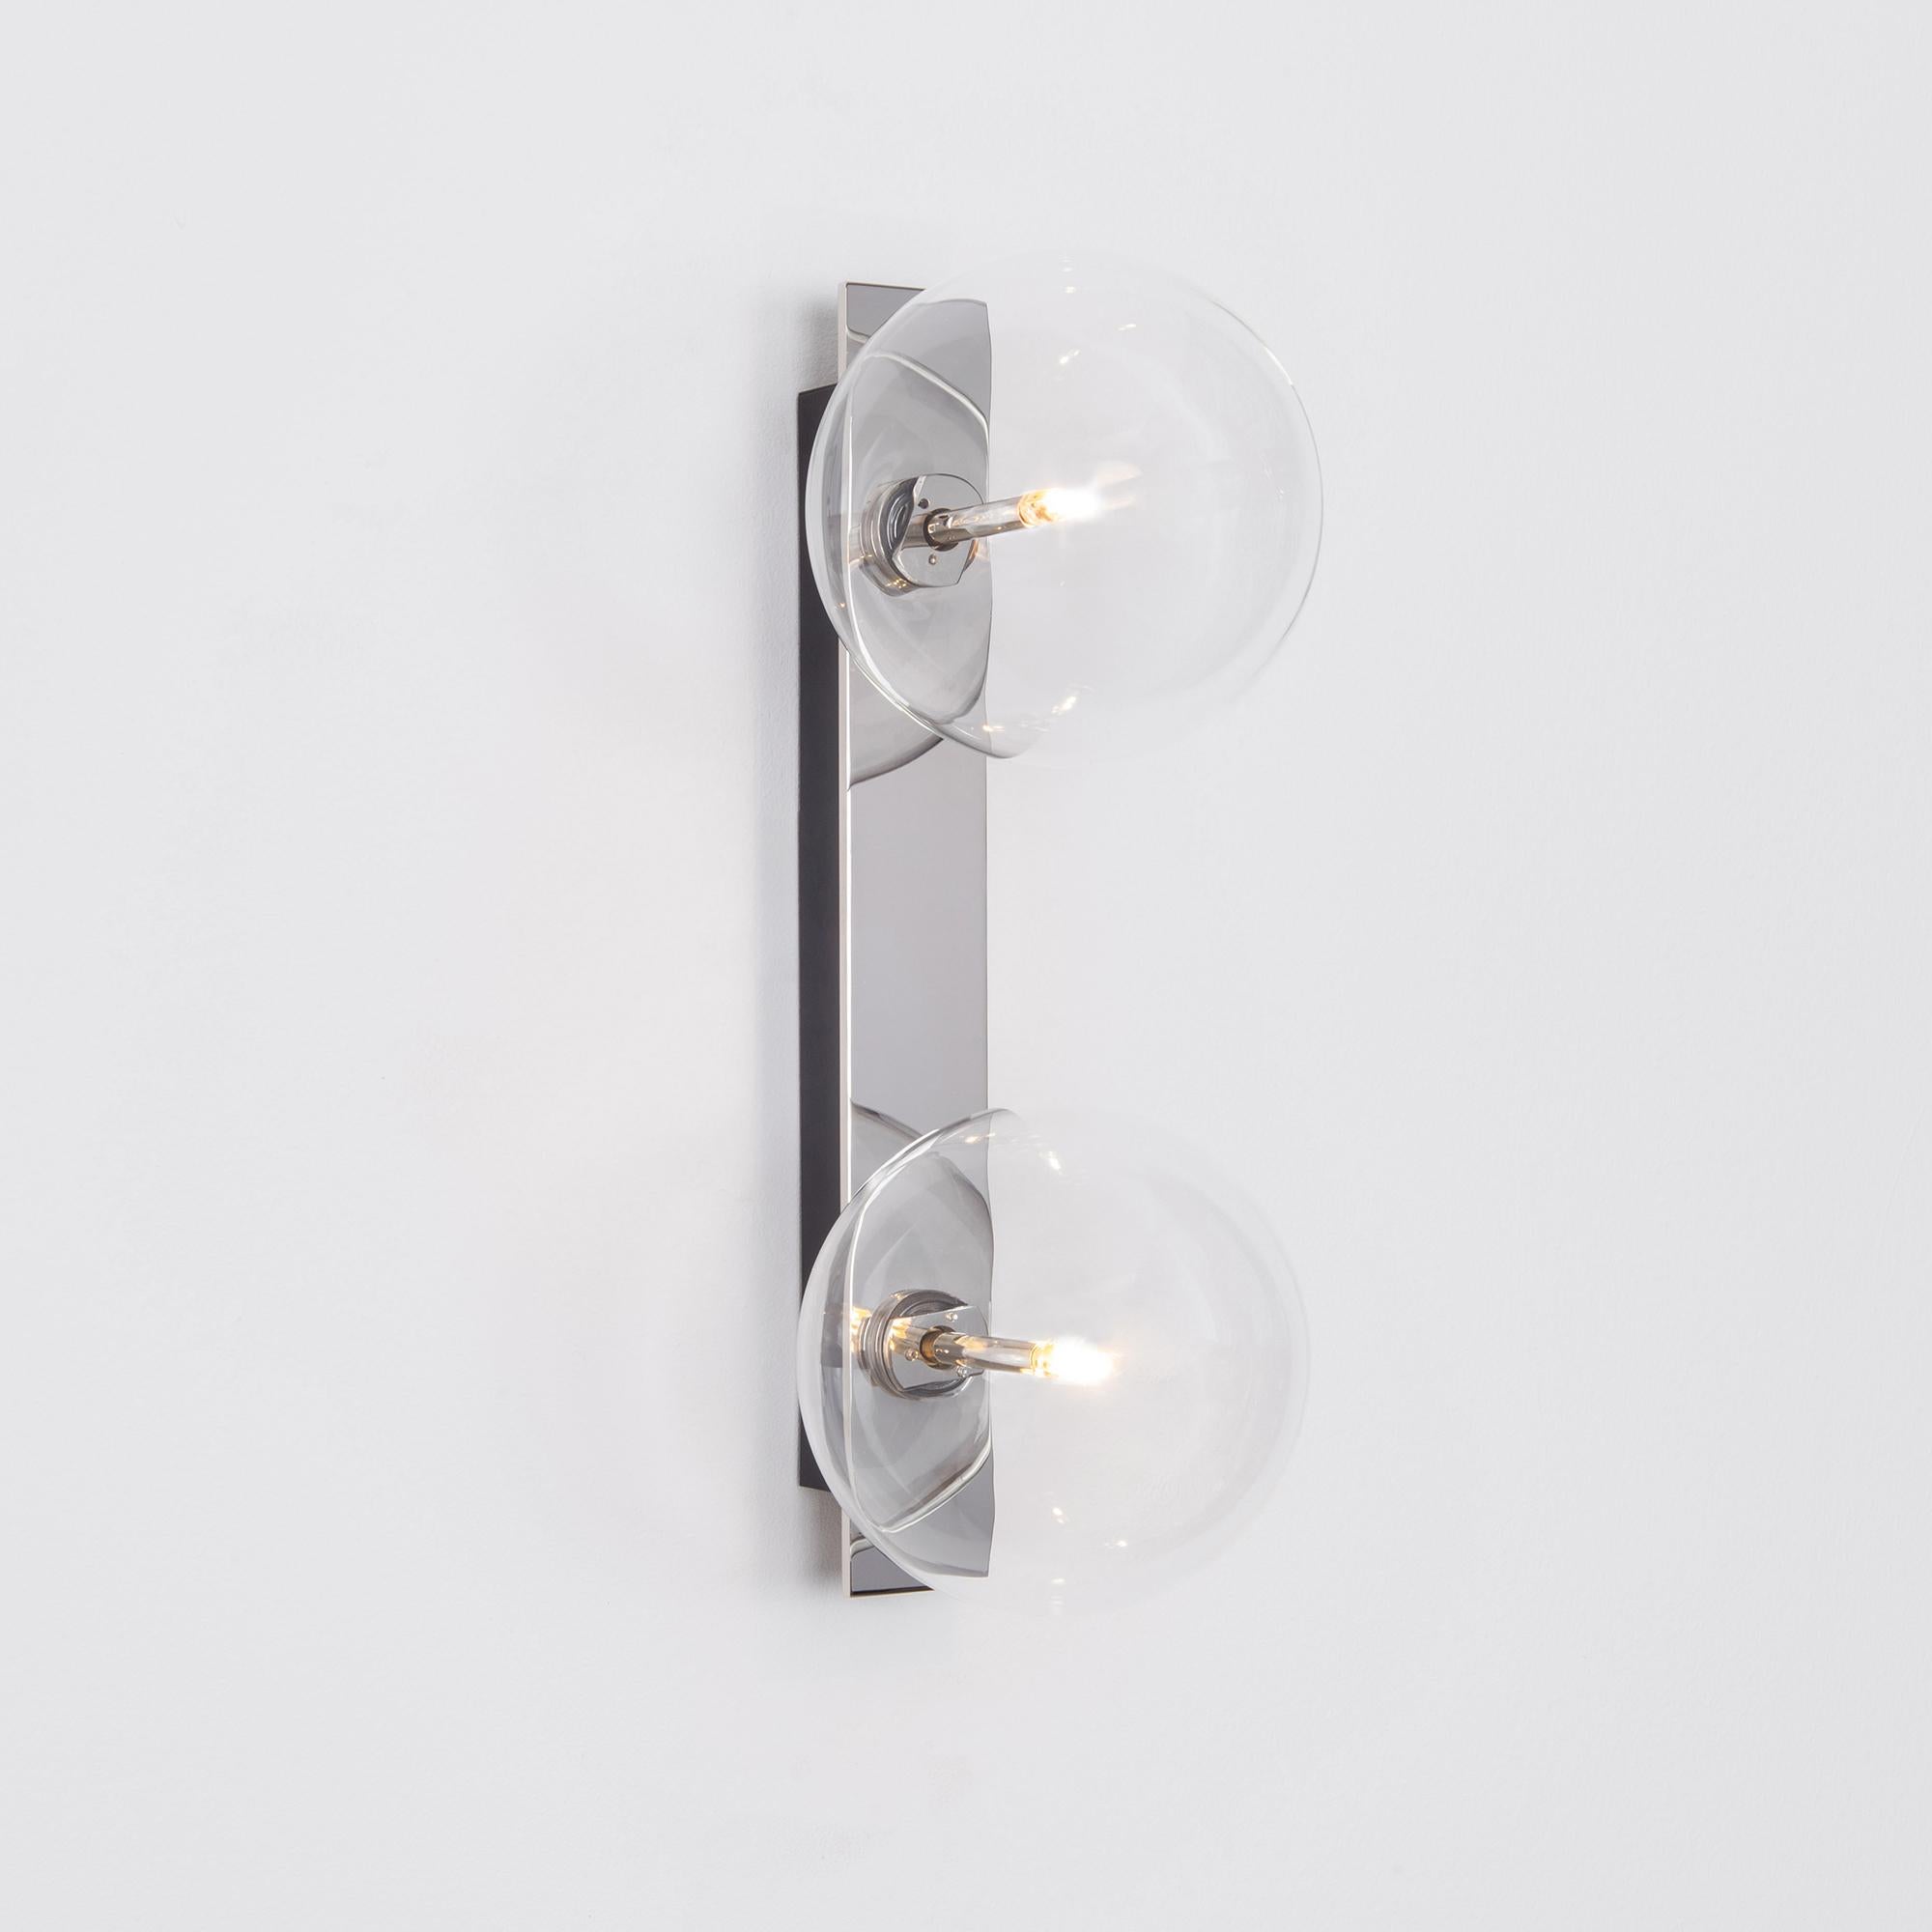 Oslo Dual wall sconce by Schwung
Dimensions: W 15 x D 19 x H 40 cm
Materials: Polished nickel, hand blown glass globes

Finishes available: Black gunmetal, polished nickel, brass
Other sizes available

Schwung is a German word, and loosely